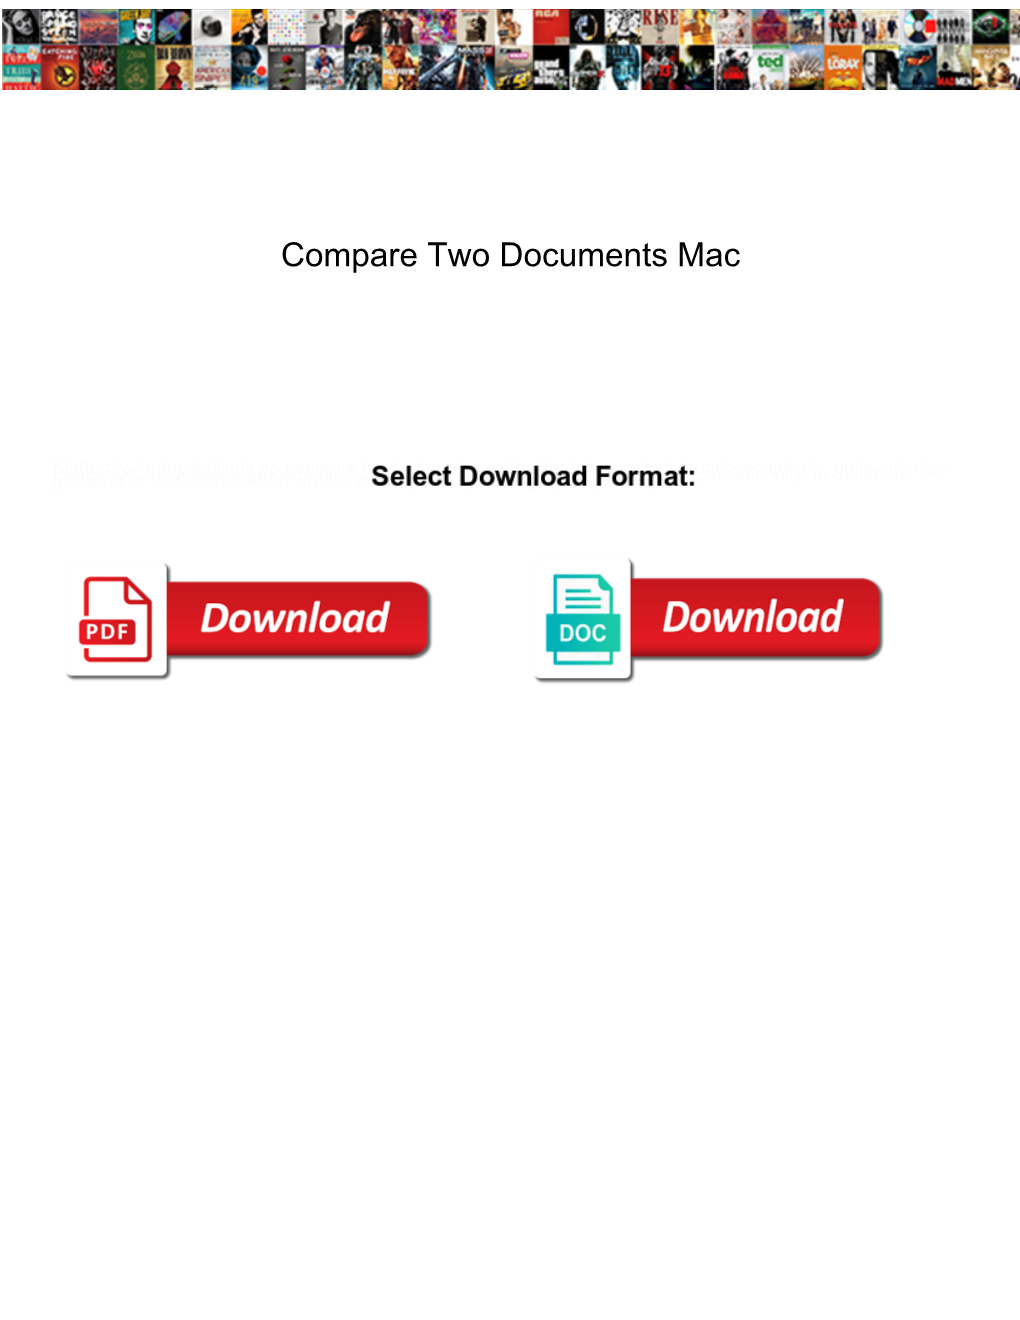 Compare Two Documents Mac